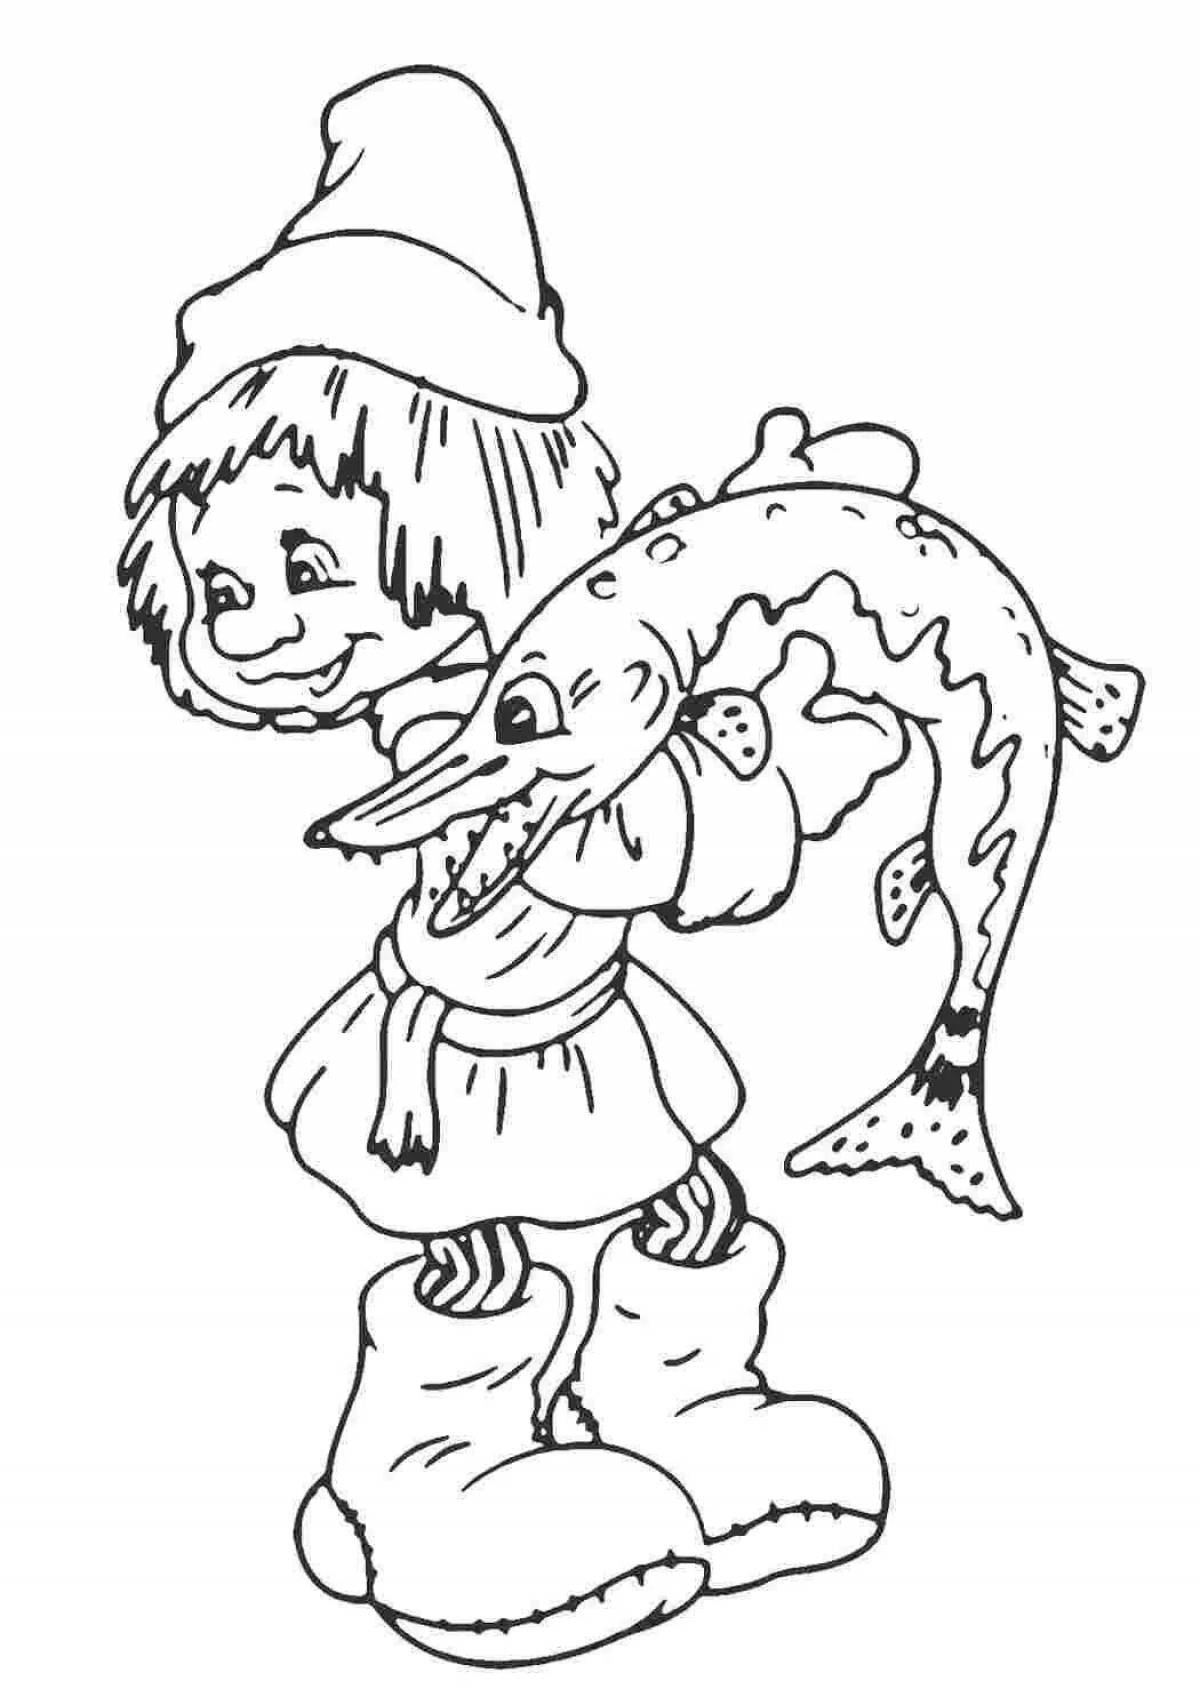 Coloring page glorious pike and emela